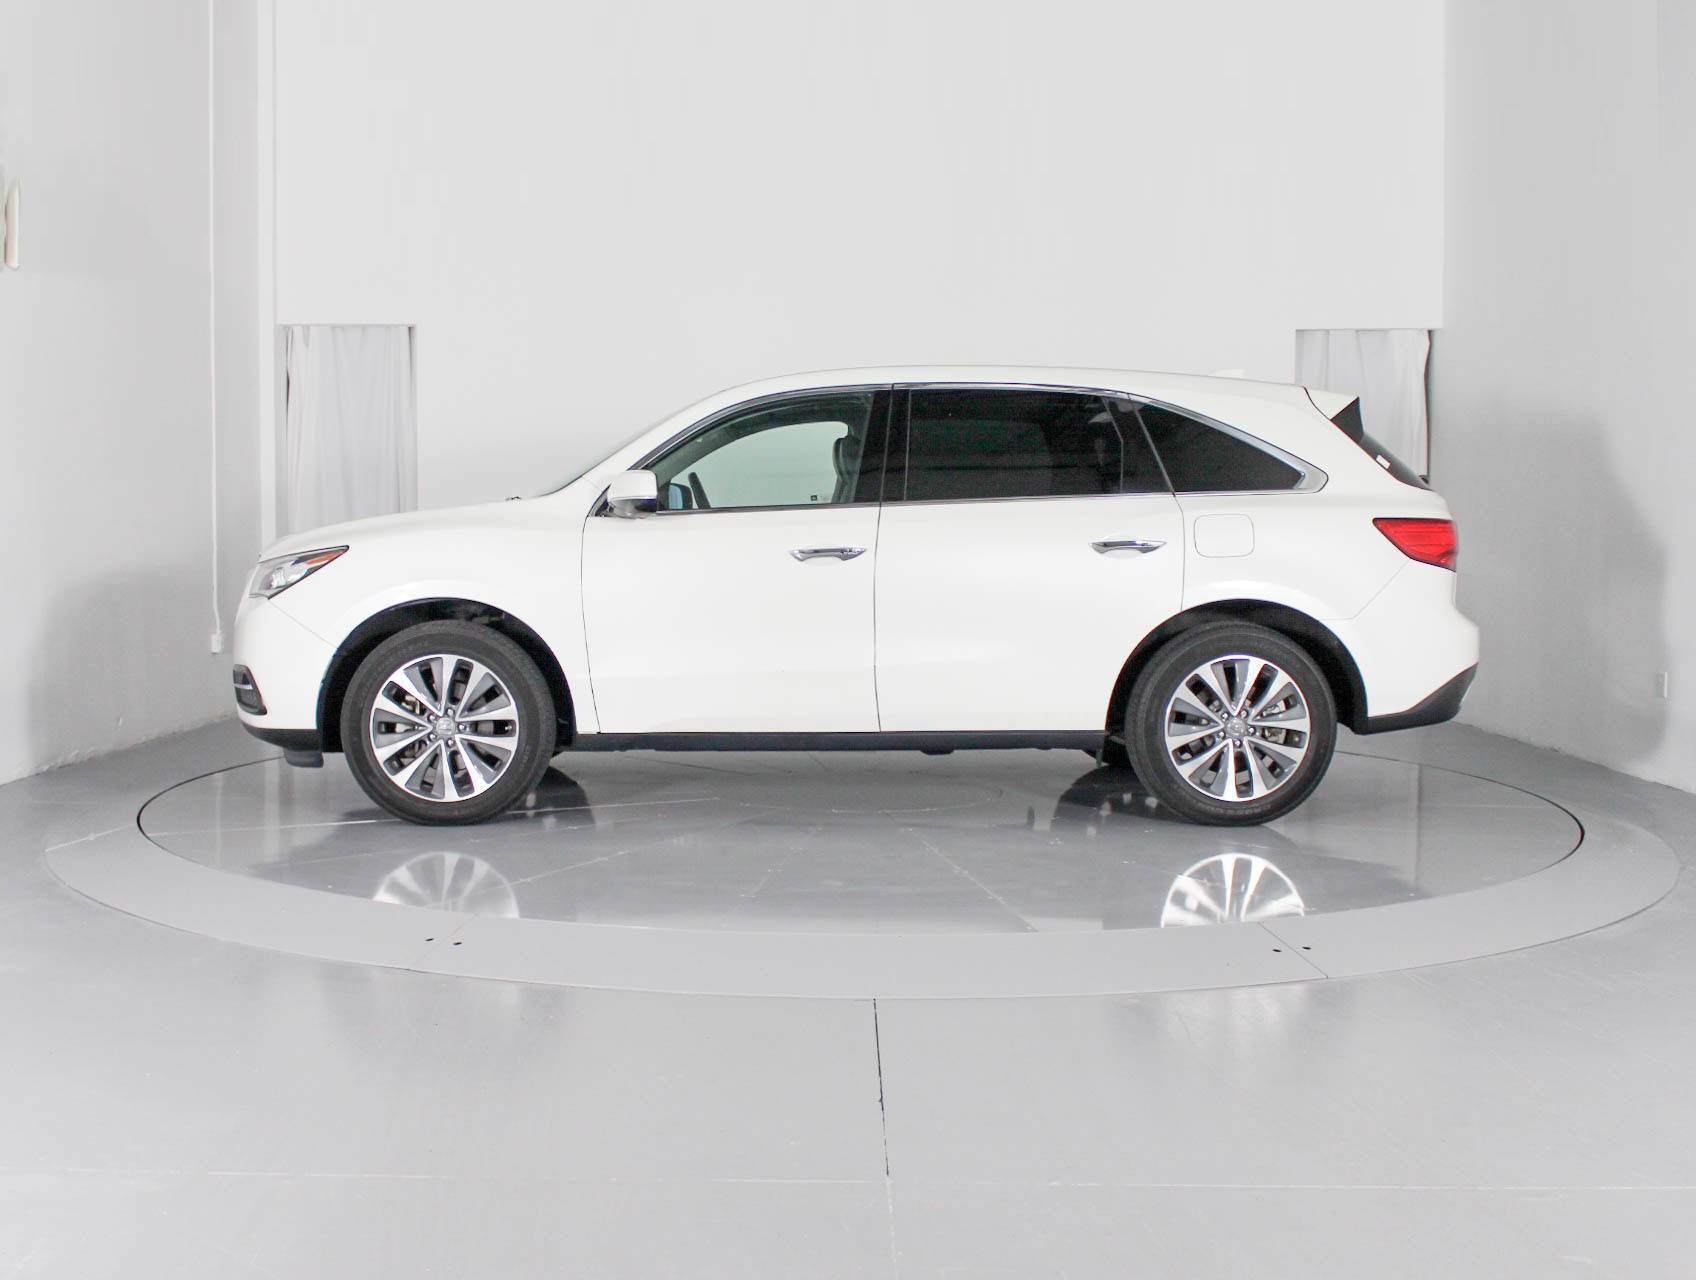 Florida Fine Cars - Used ACURA MDX 2016 MARGATE TECHNOLOGY PACKAGE